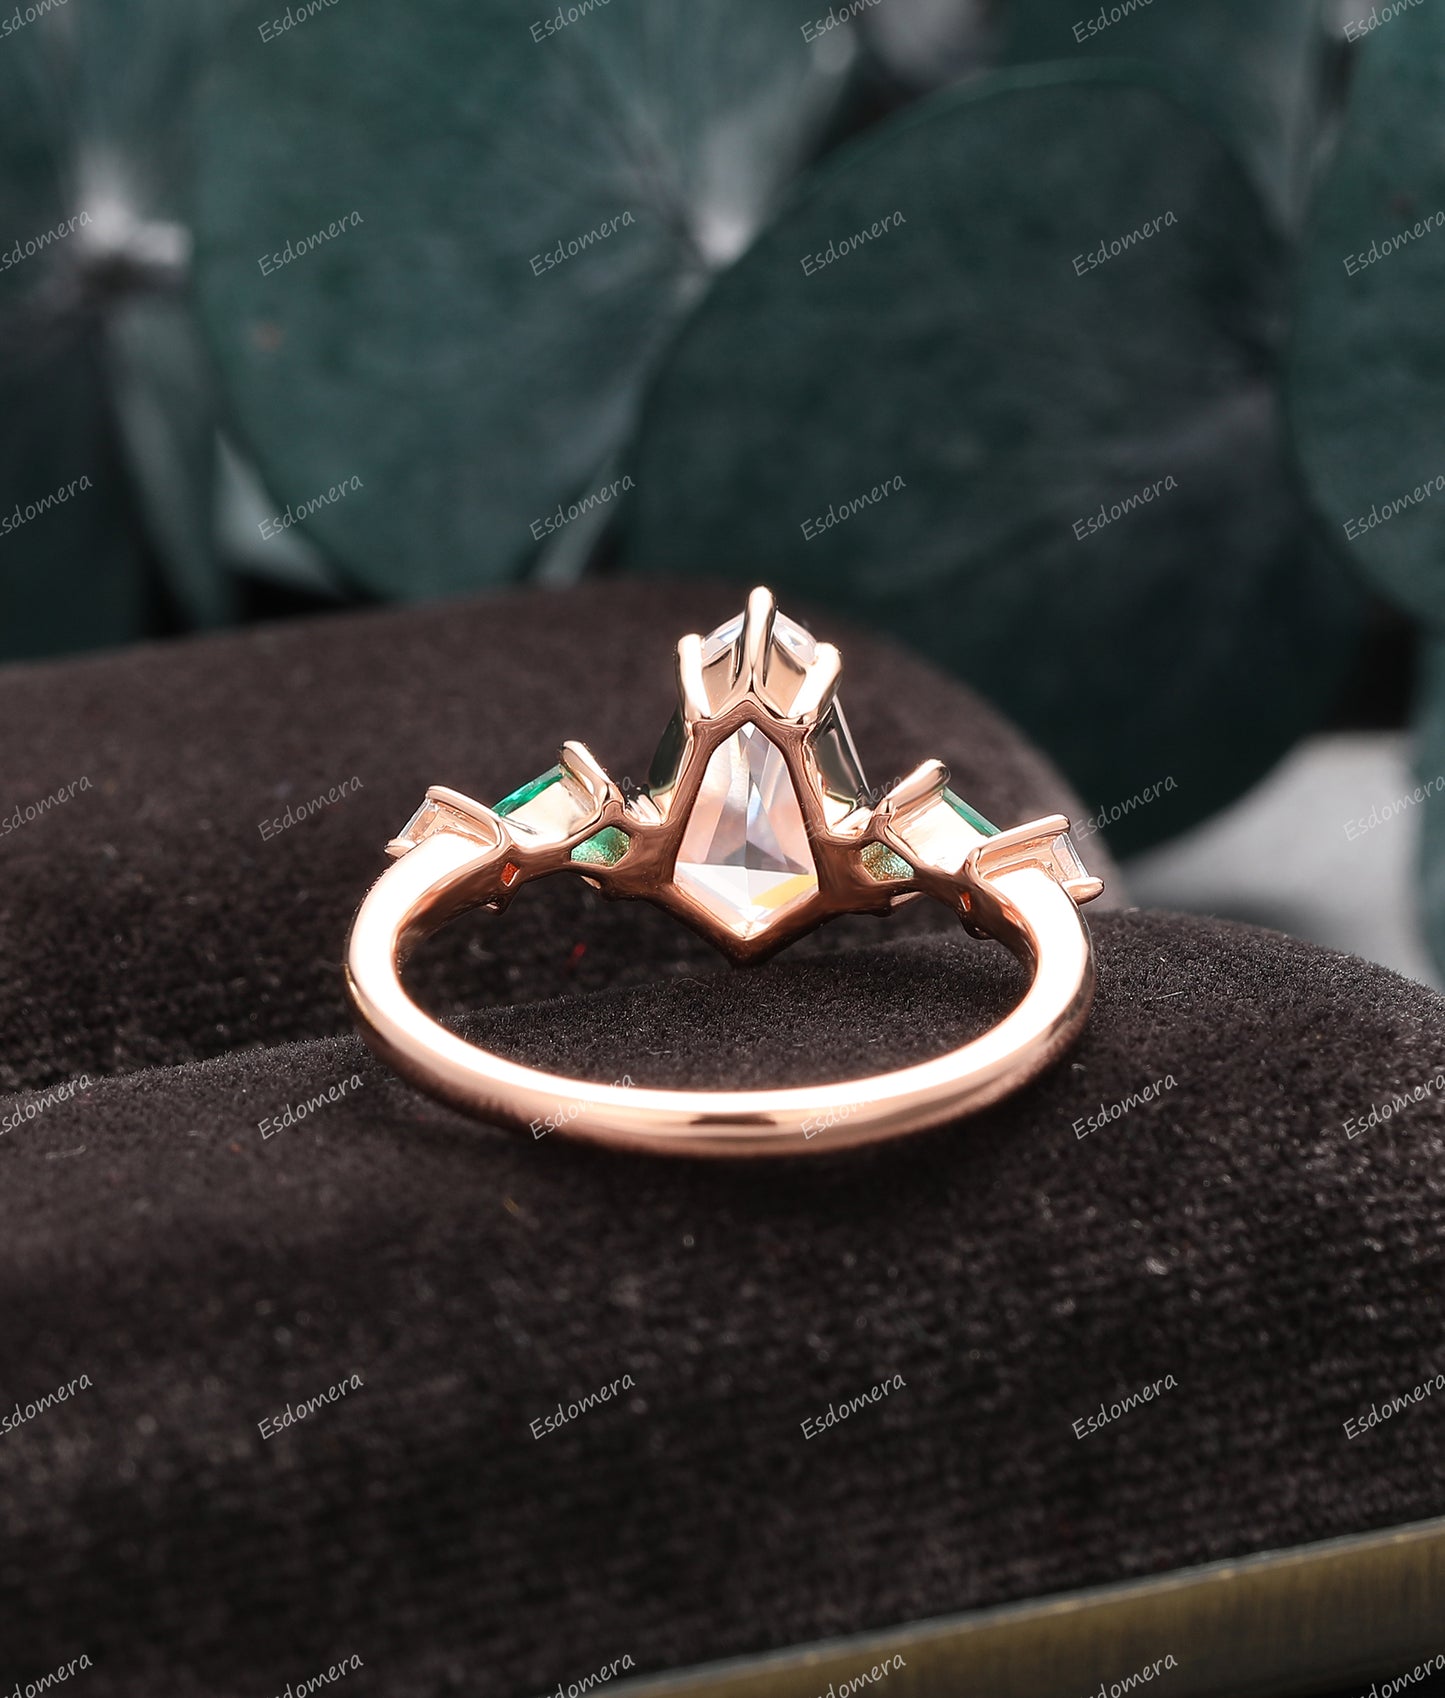 Vintage 2.10CT Pointed Shield Shaped Moissanite Engagement Ring, Kite Shape Emerald Bridal Ring, Soild 14K Gold Ring Unique Gift For Her